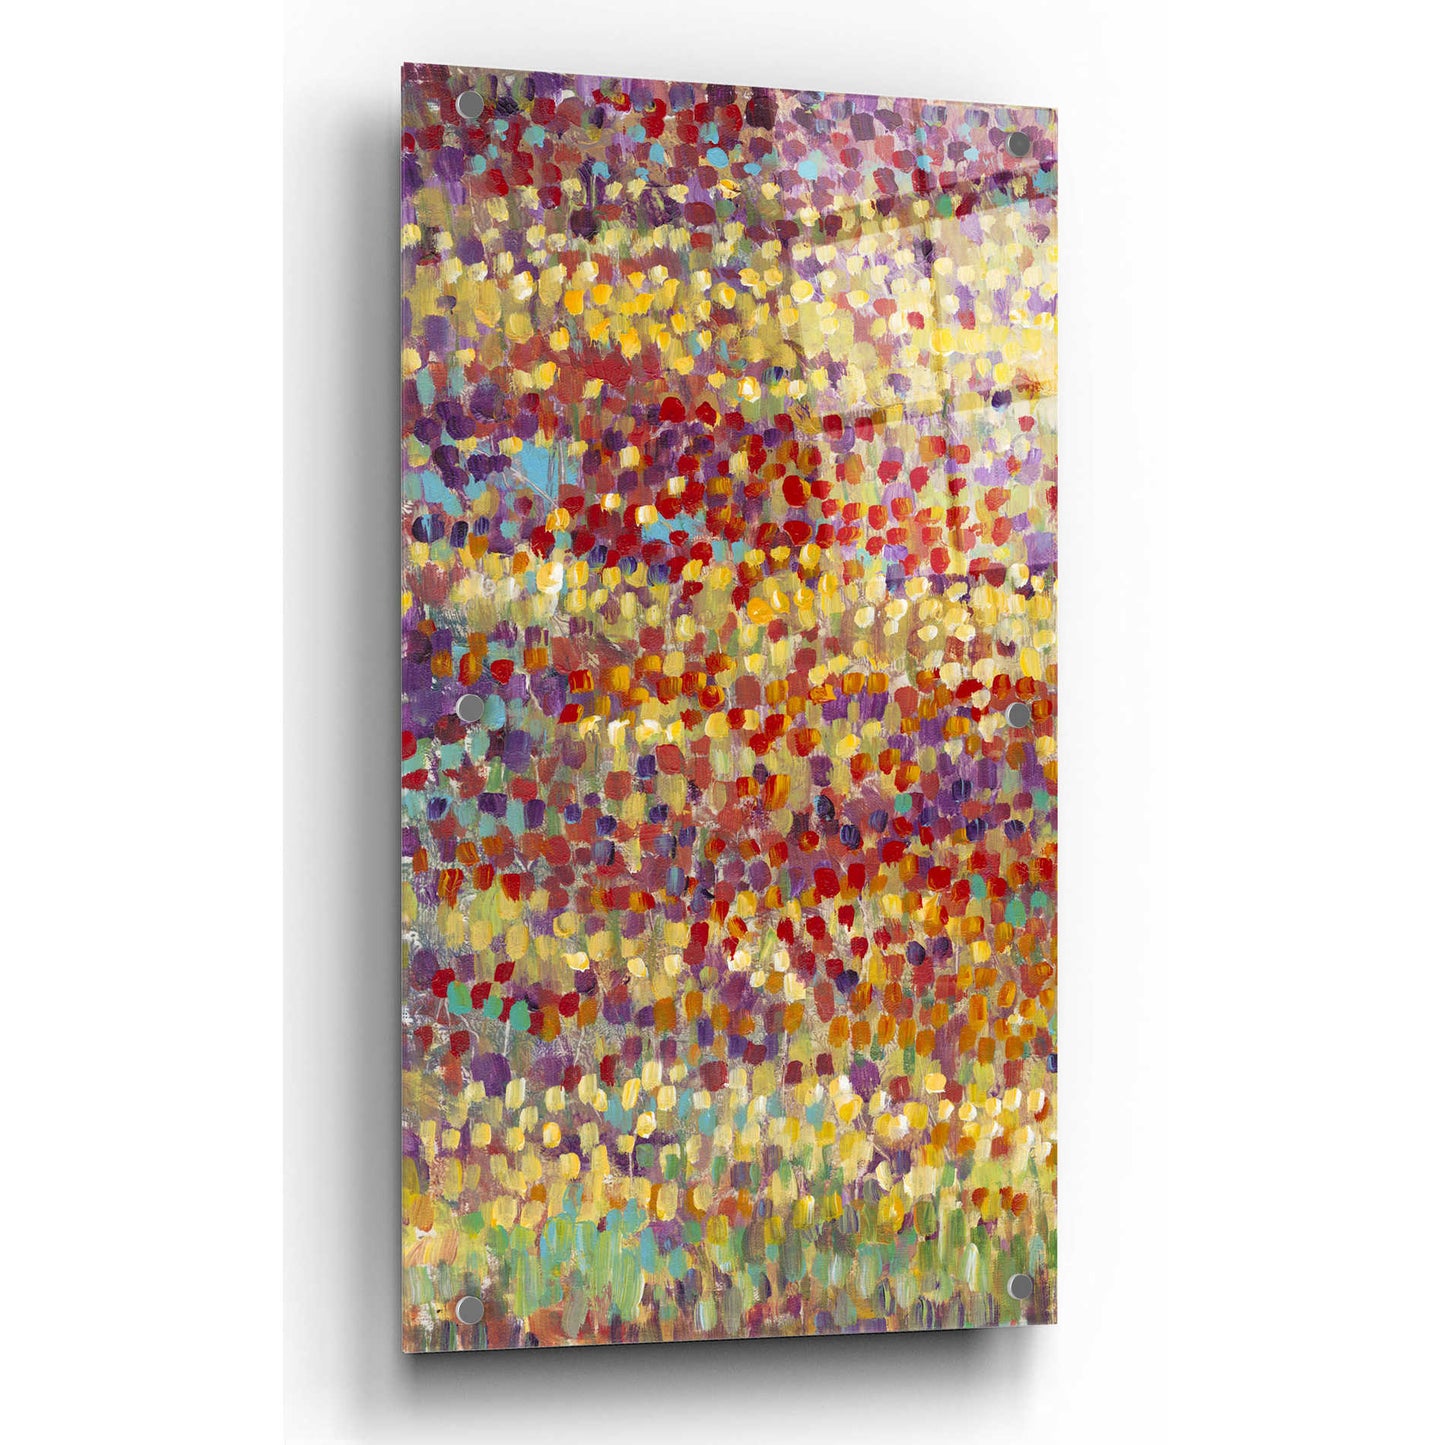 Epic Art 'Tulips in Bloom I' by Tim O'Toole, Acrylic Glass Wall Art,24x48